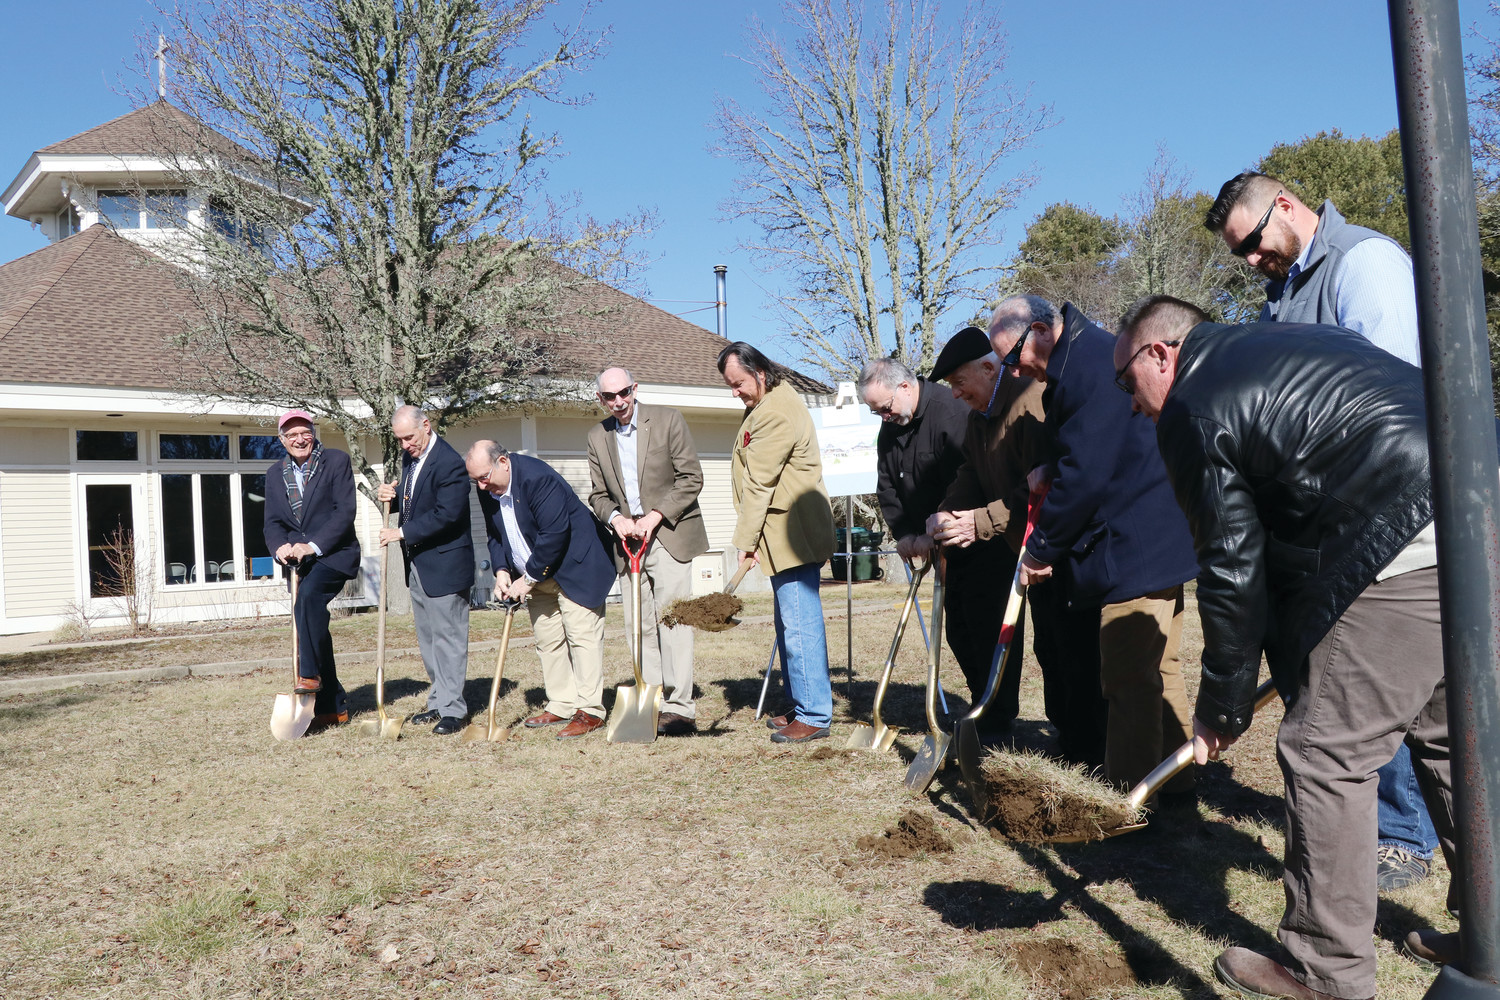 From left, Leo Mainelli, Dave Sloan, Jim White, Doug Noble, Barry Goewey (project architect), Father Paul Desmarais, Ron DuBois, Mike Cocci (builder), Tom Canning and Richard Lambert break ground on the project on Feb. 24, as parishioners look on.